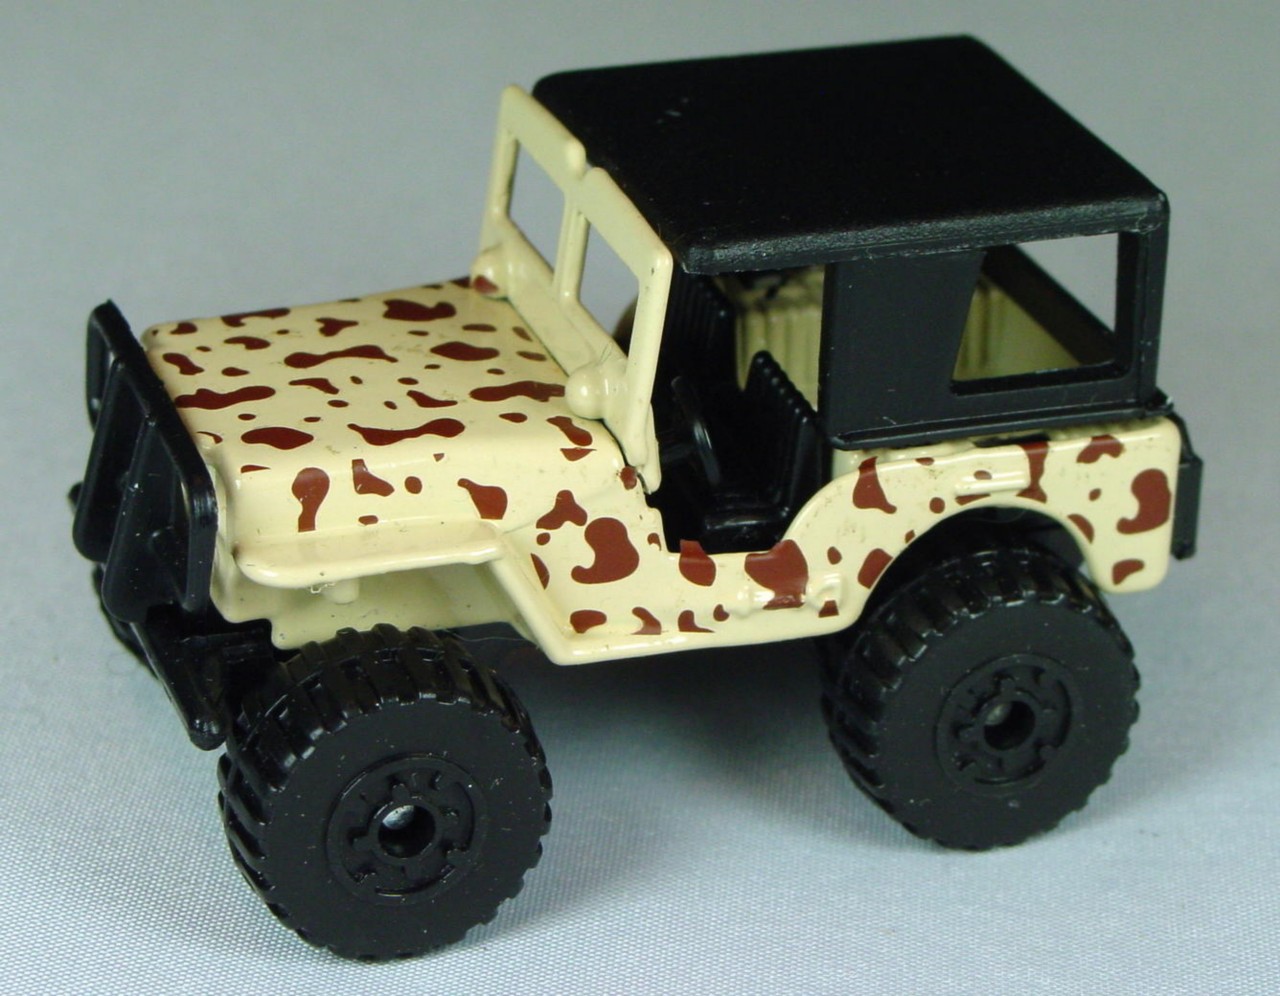 Pre-production 20 C 20 - Jeep 4x4 Beige black base brown cam tampo BLK HUBS made in Thailand